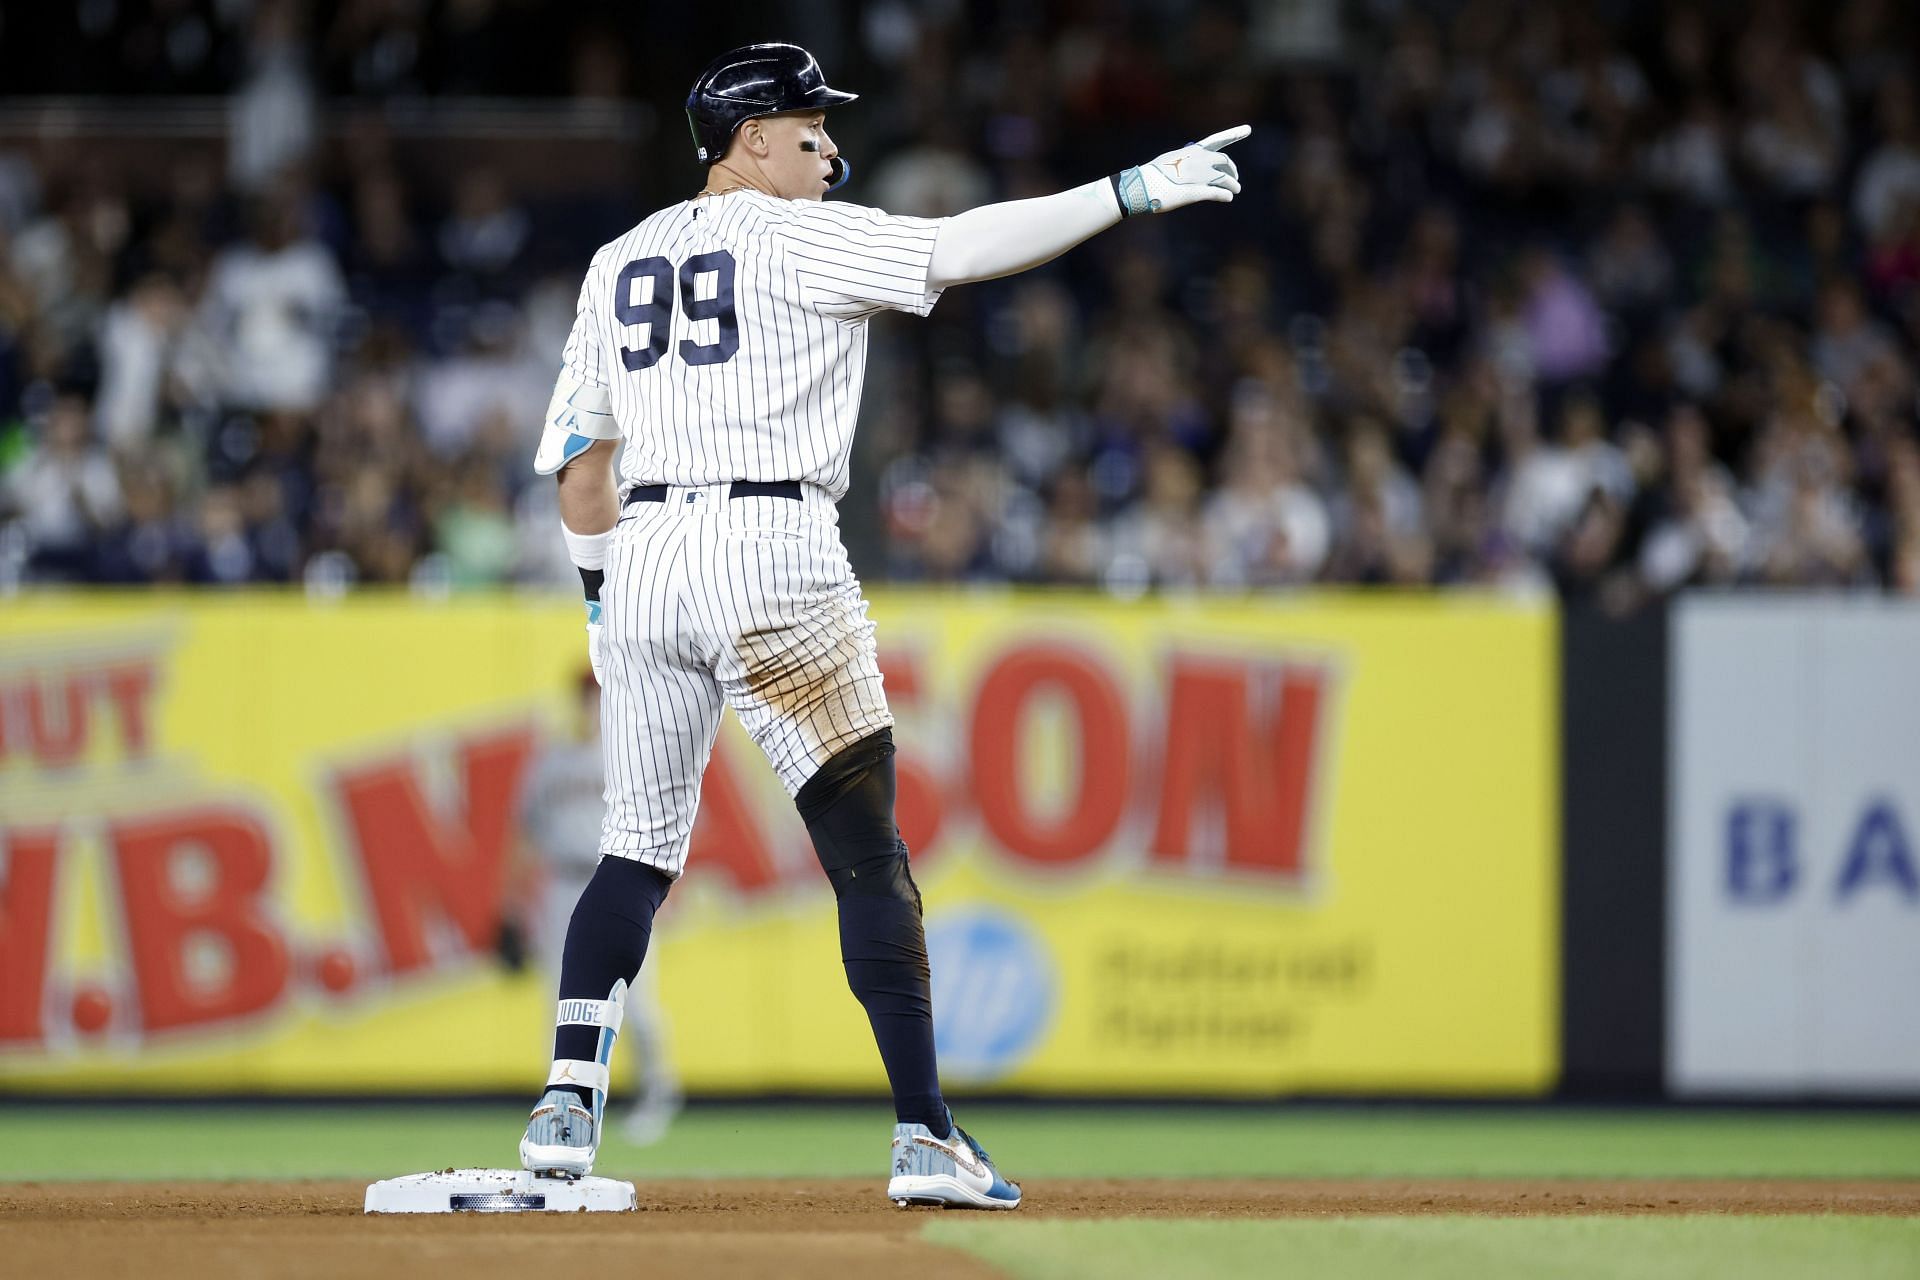 Aaron Judge was a first-round pick by the Yankees